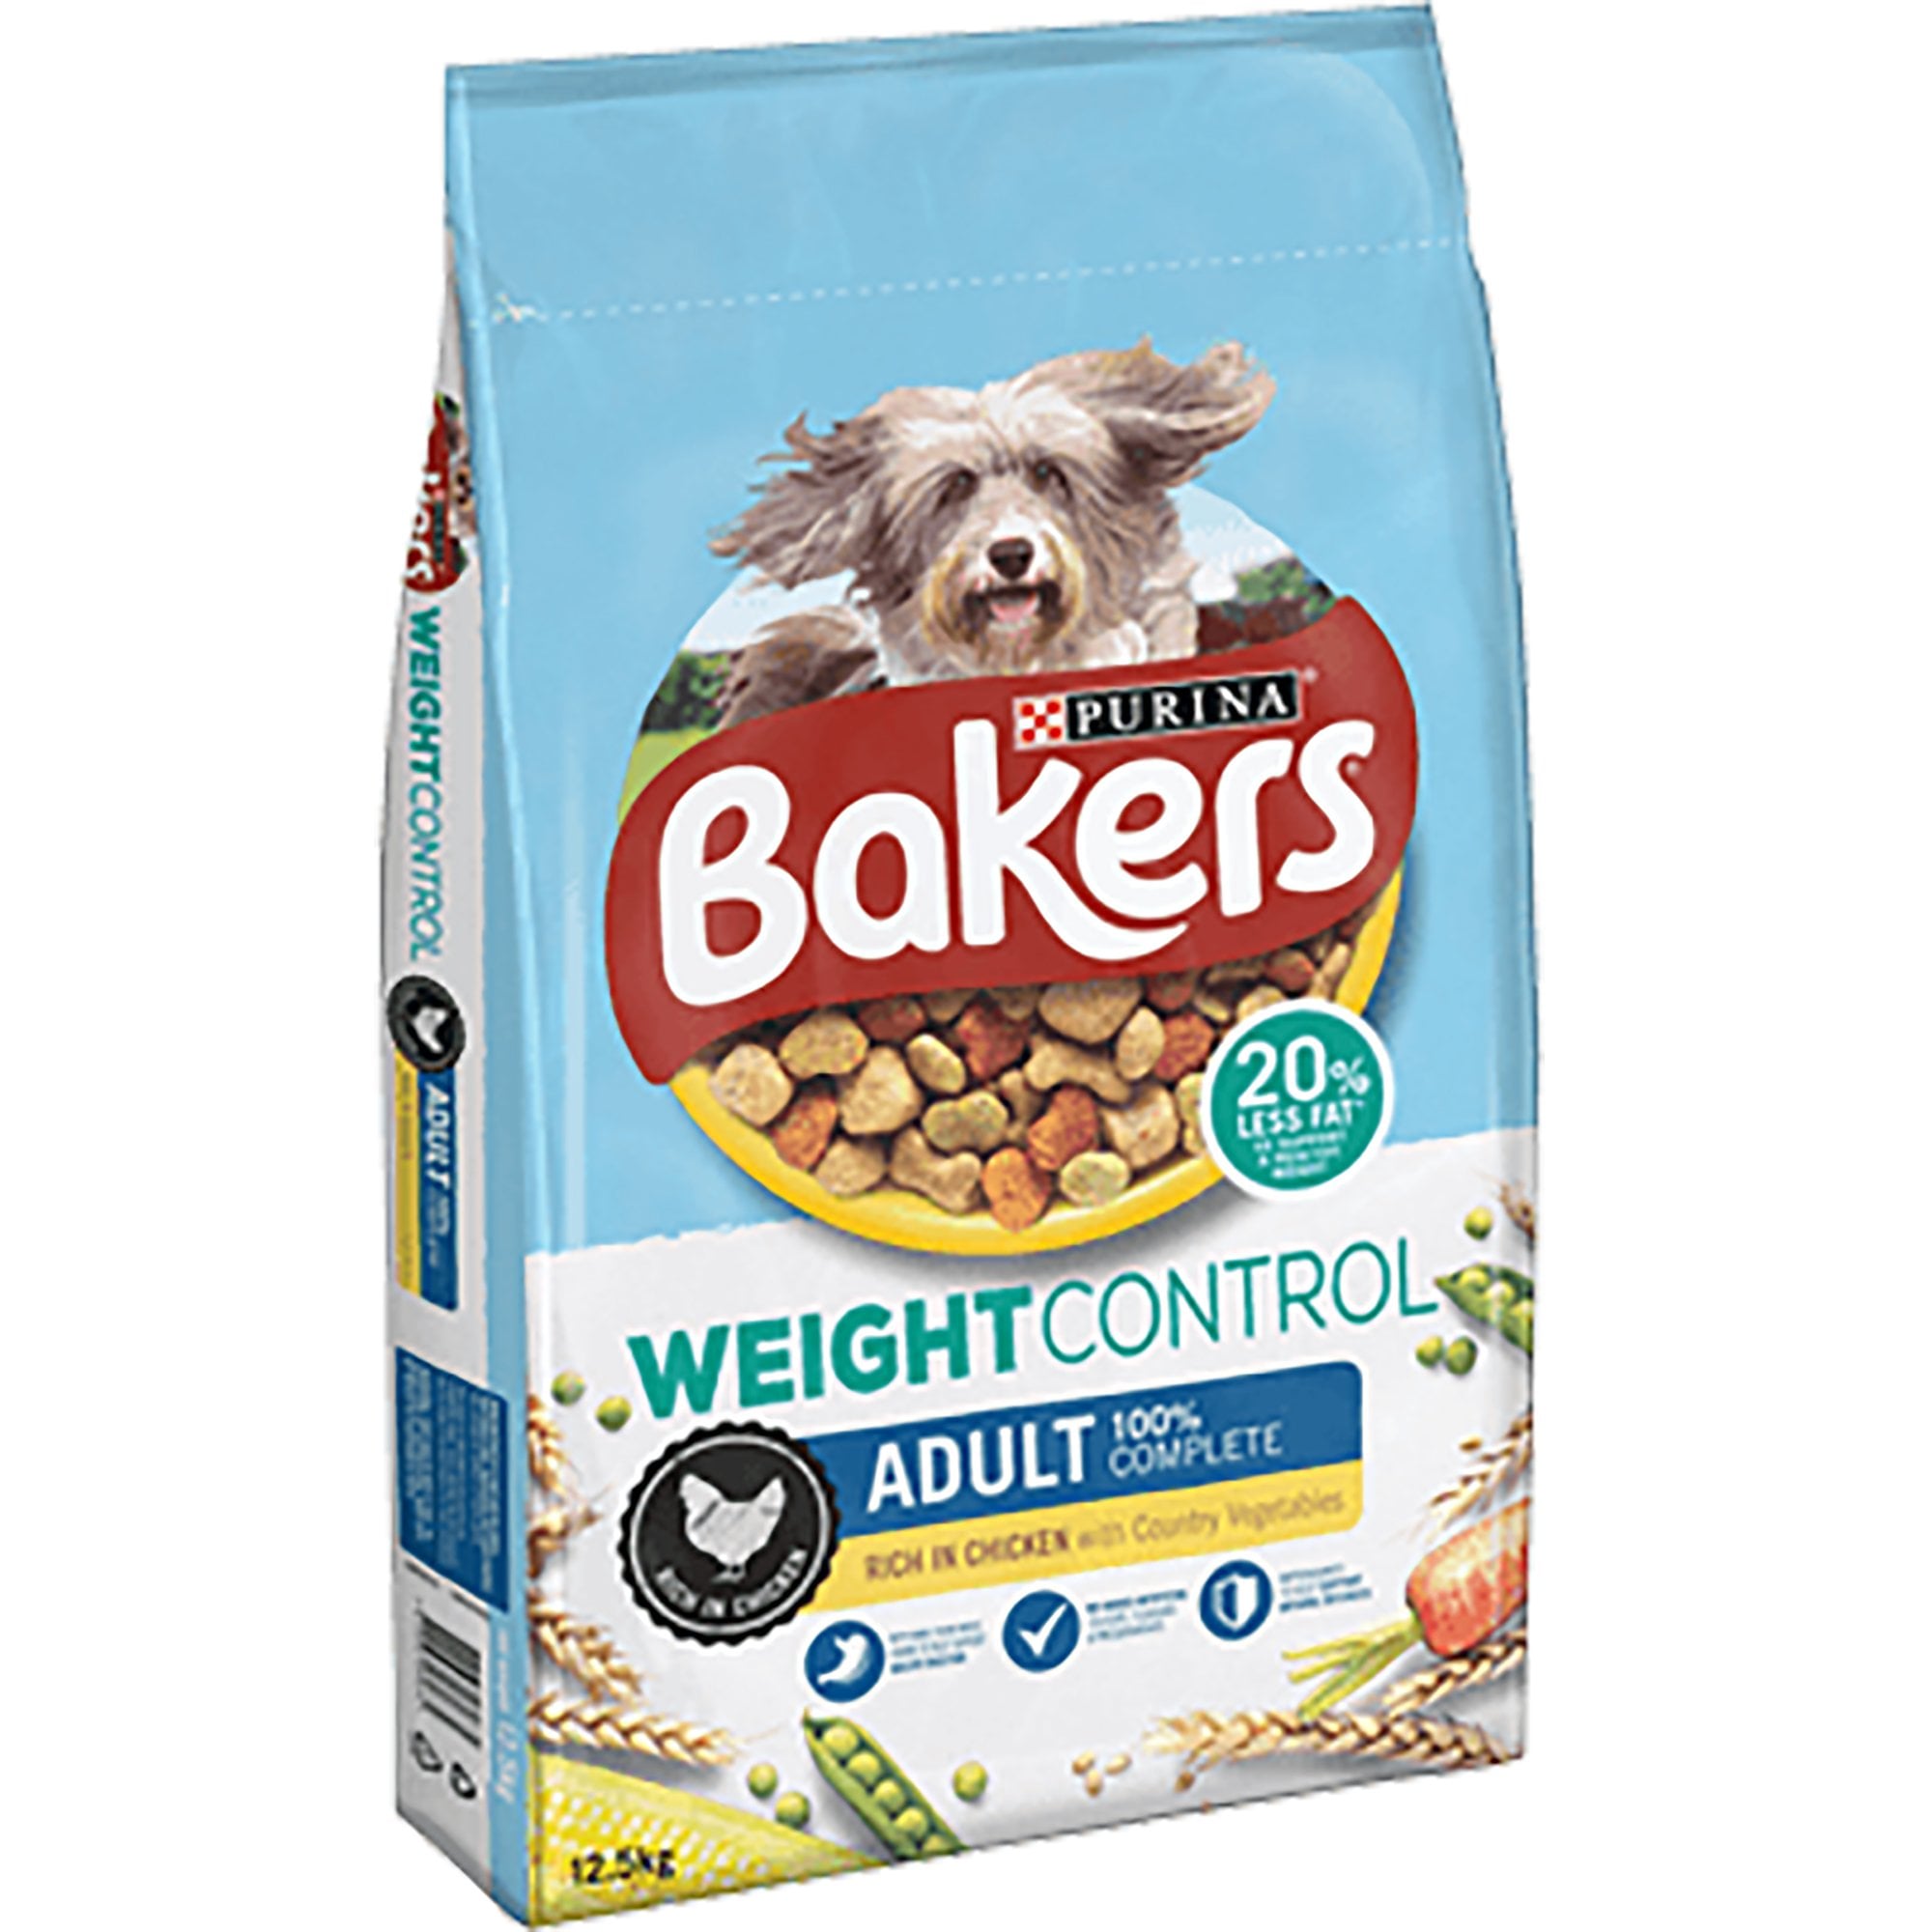 Bakers Weight Control Chicken 12.5kg